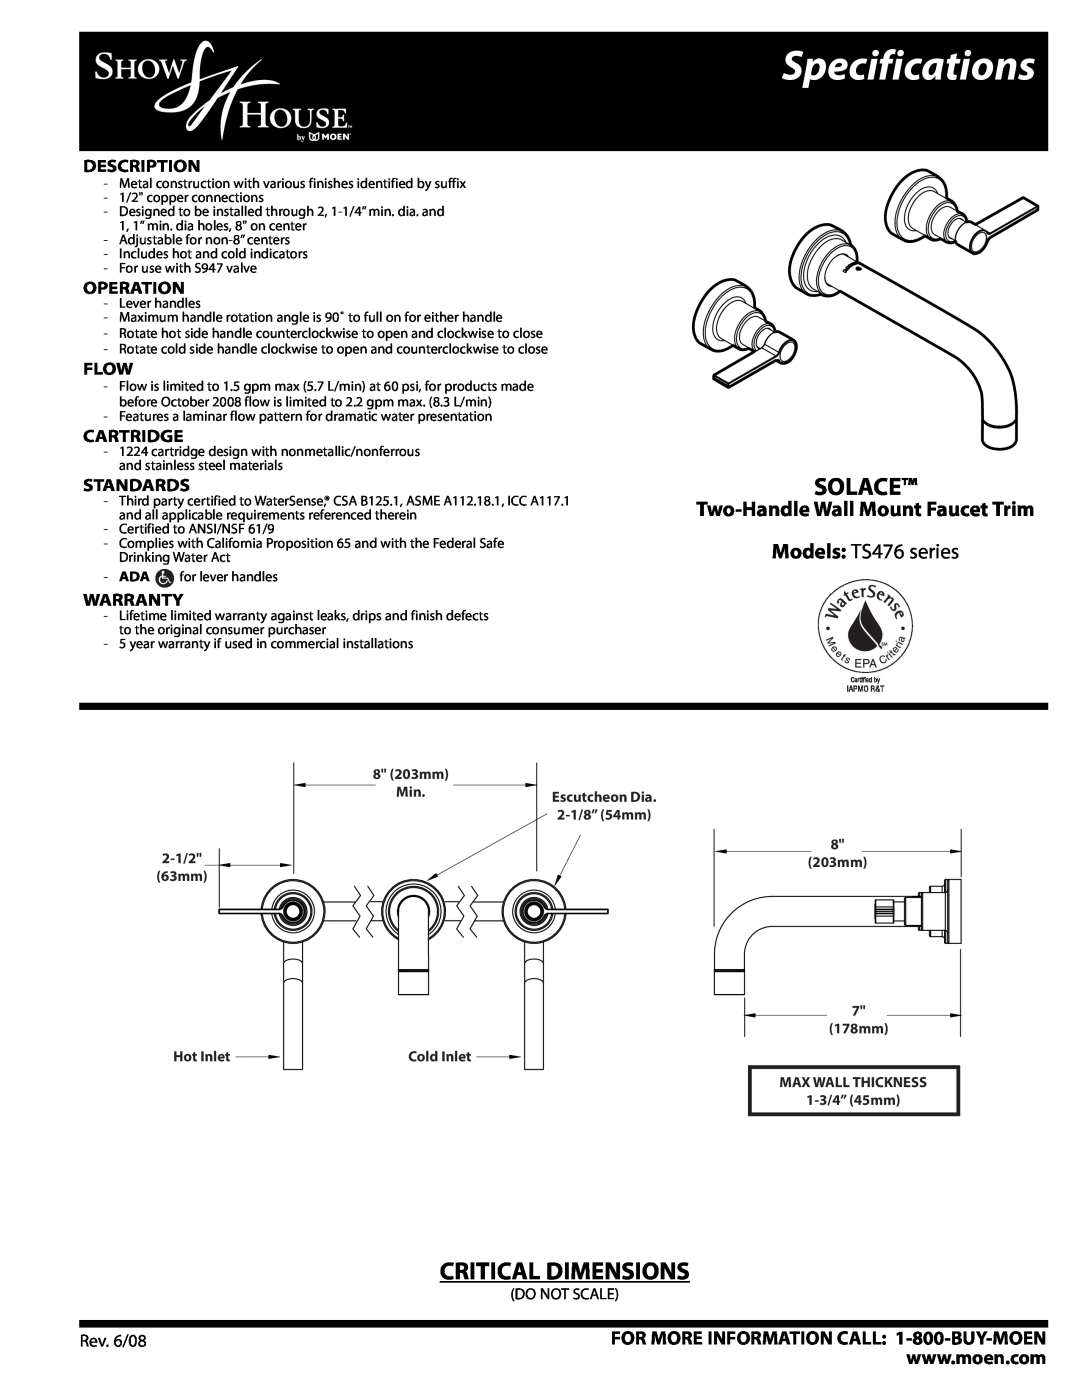 Moen TS476 Series specifications Specifications, Solace, Critical Dimensions, Two-Handle Wall Mount Faucet Trim, Operation 